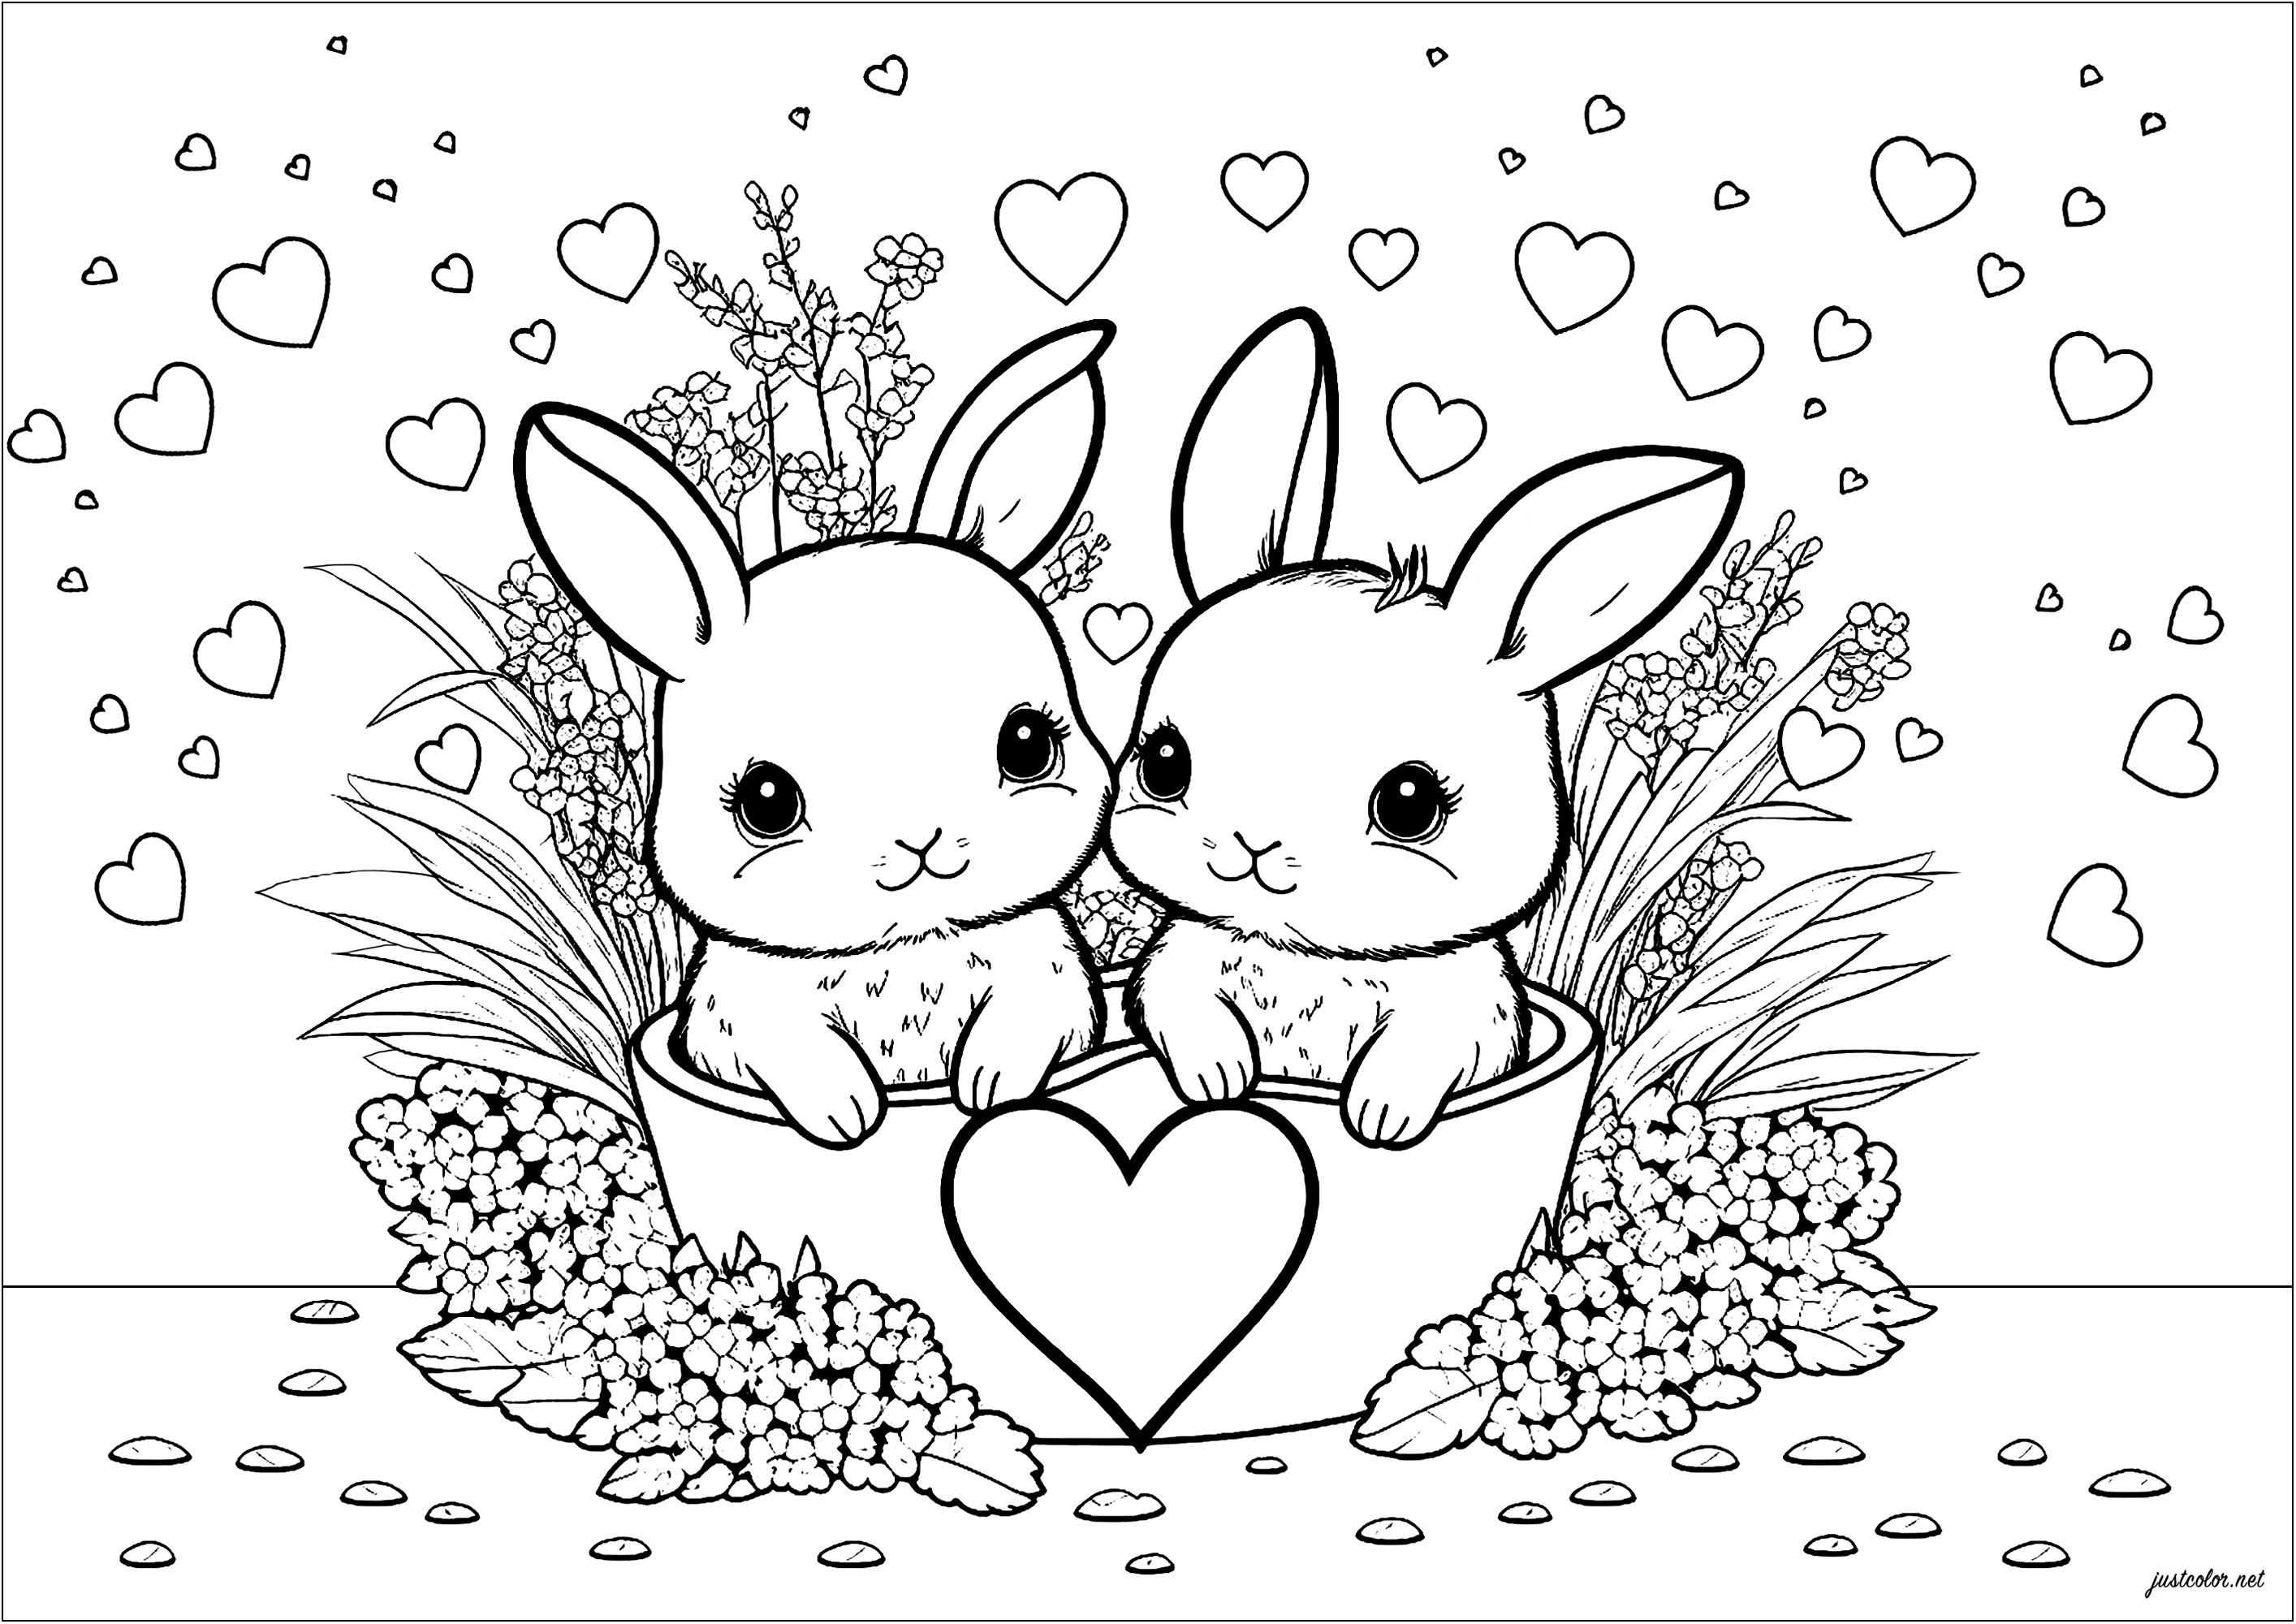 Simple coloring page showing two rabbits and many hearts. This coloring page is really cute and childlike. It features two little rabbits surrounded by lots of colorful hearts. The bunnies are very expressive and their ears are big and soft.